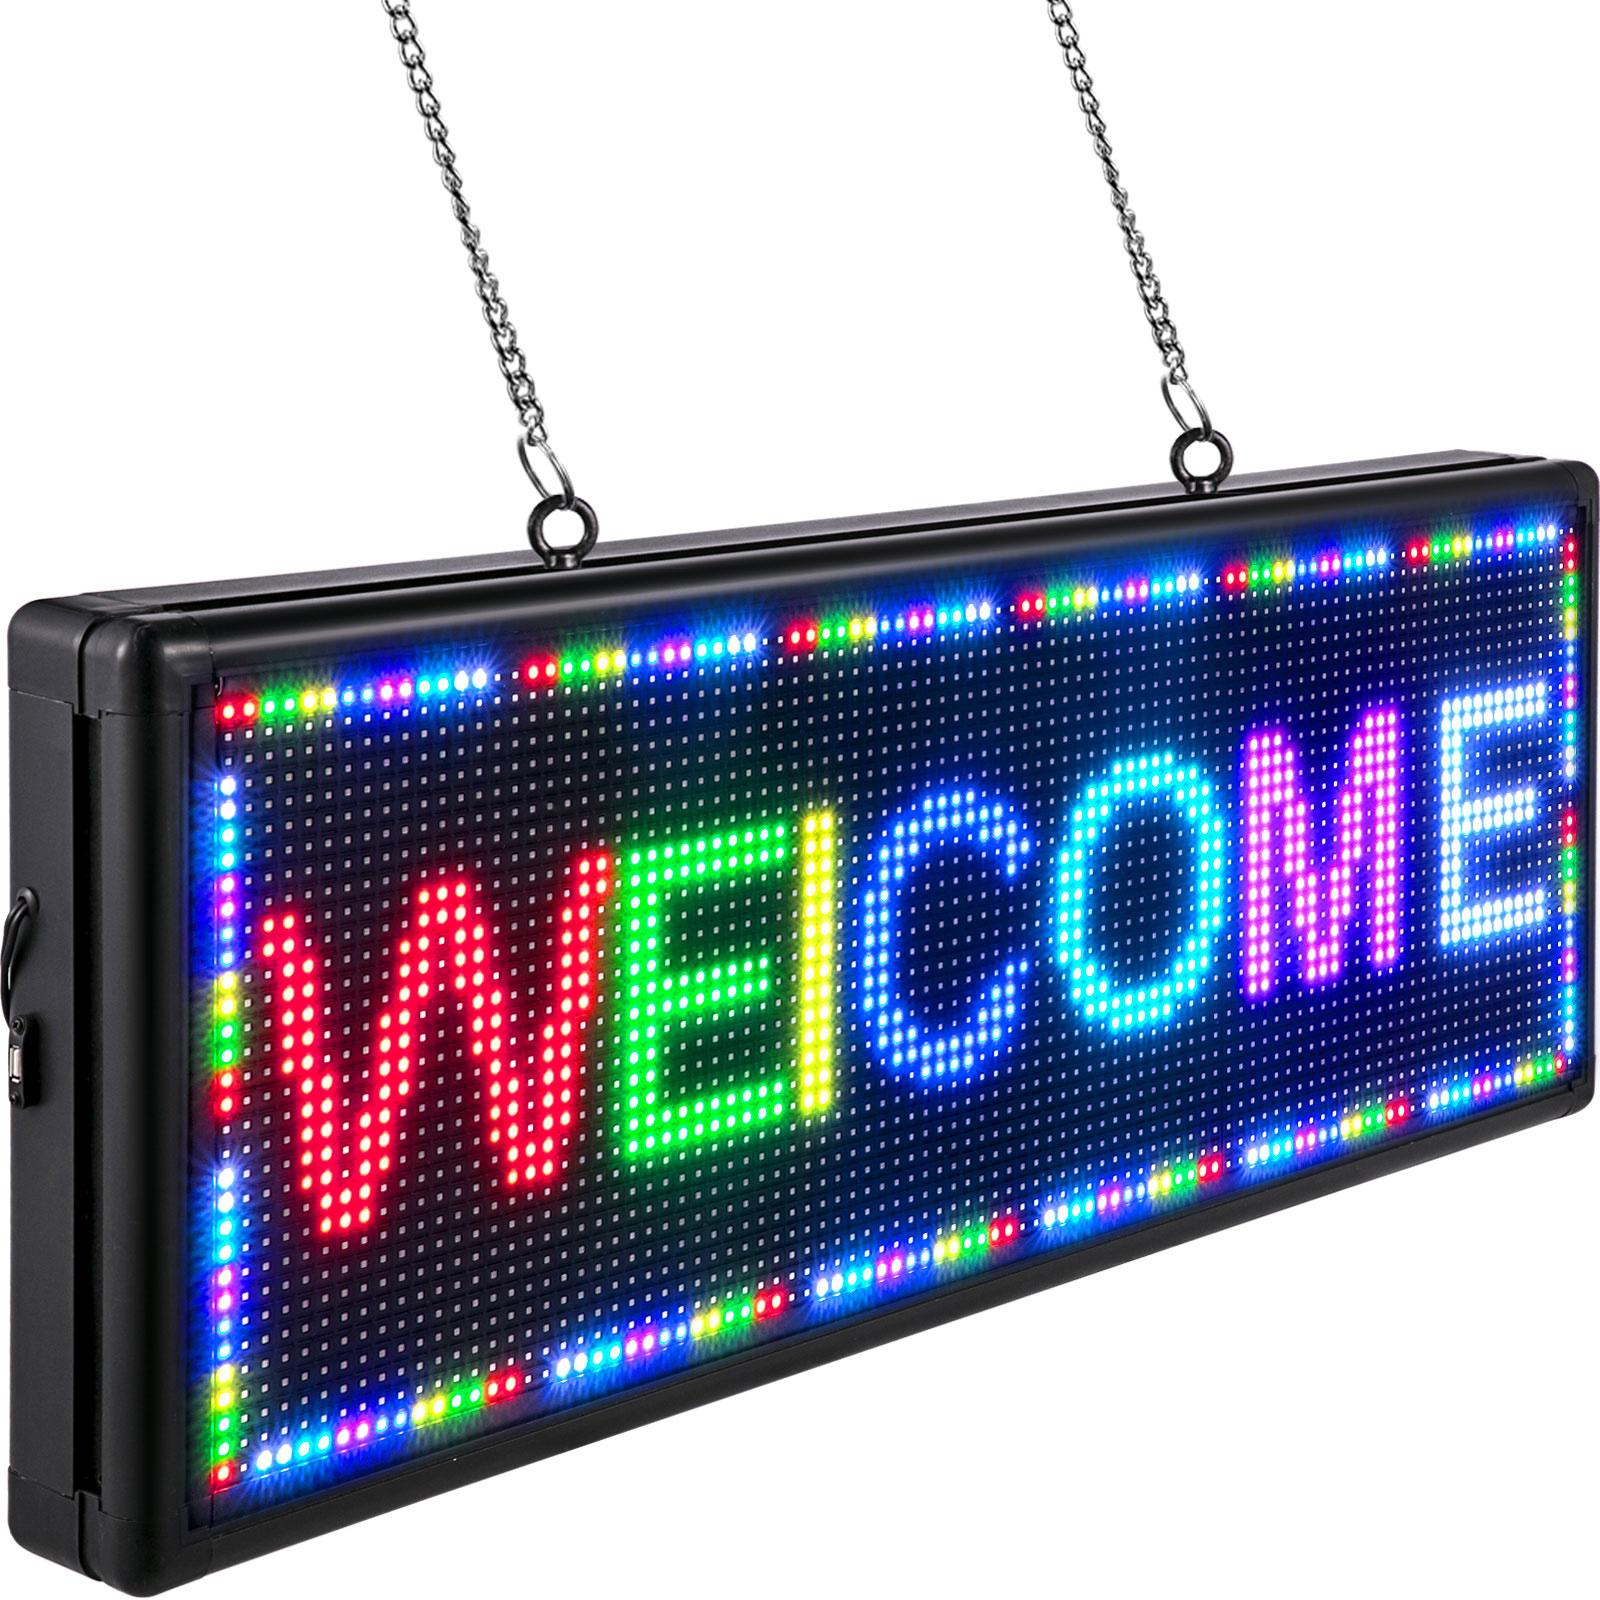 Super Bright WHITE LED DISPLAY SCROLLING PROGRAMMABLE MOVING MESSAGE SHOP SIGN 